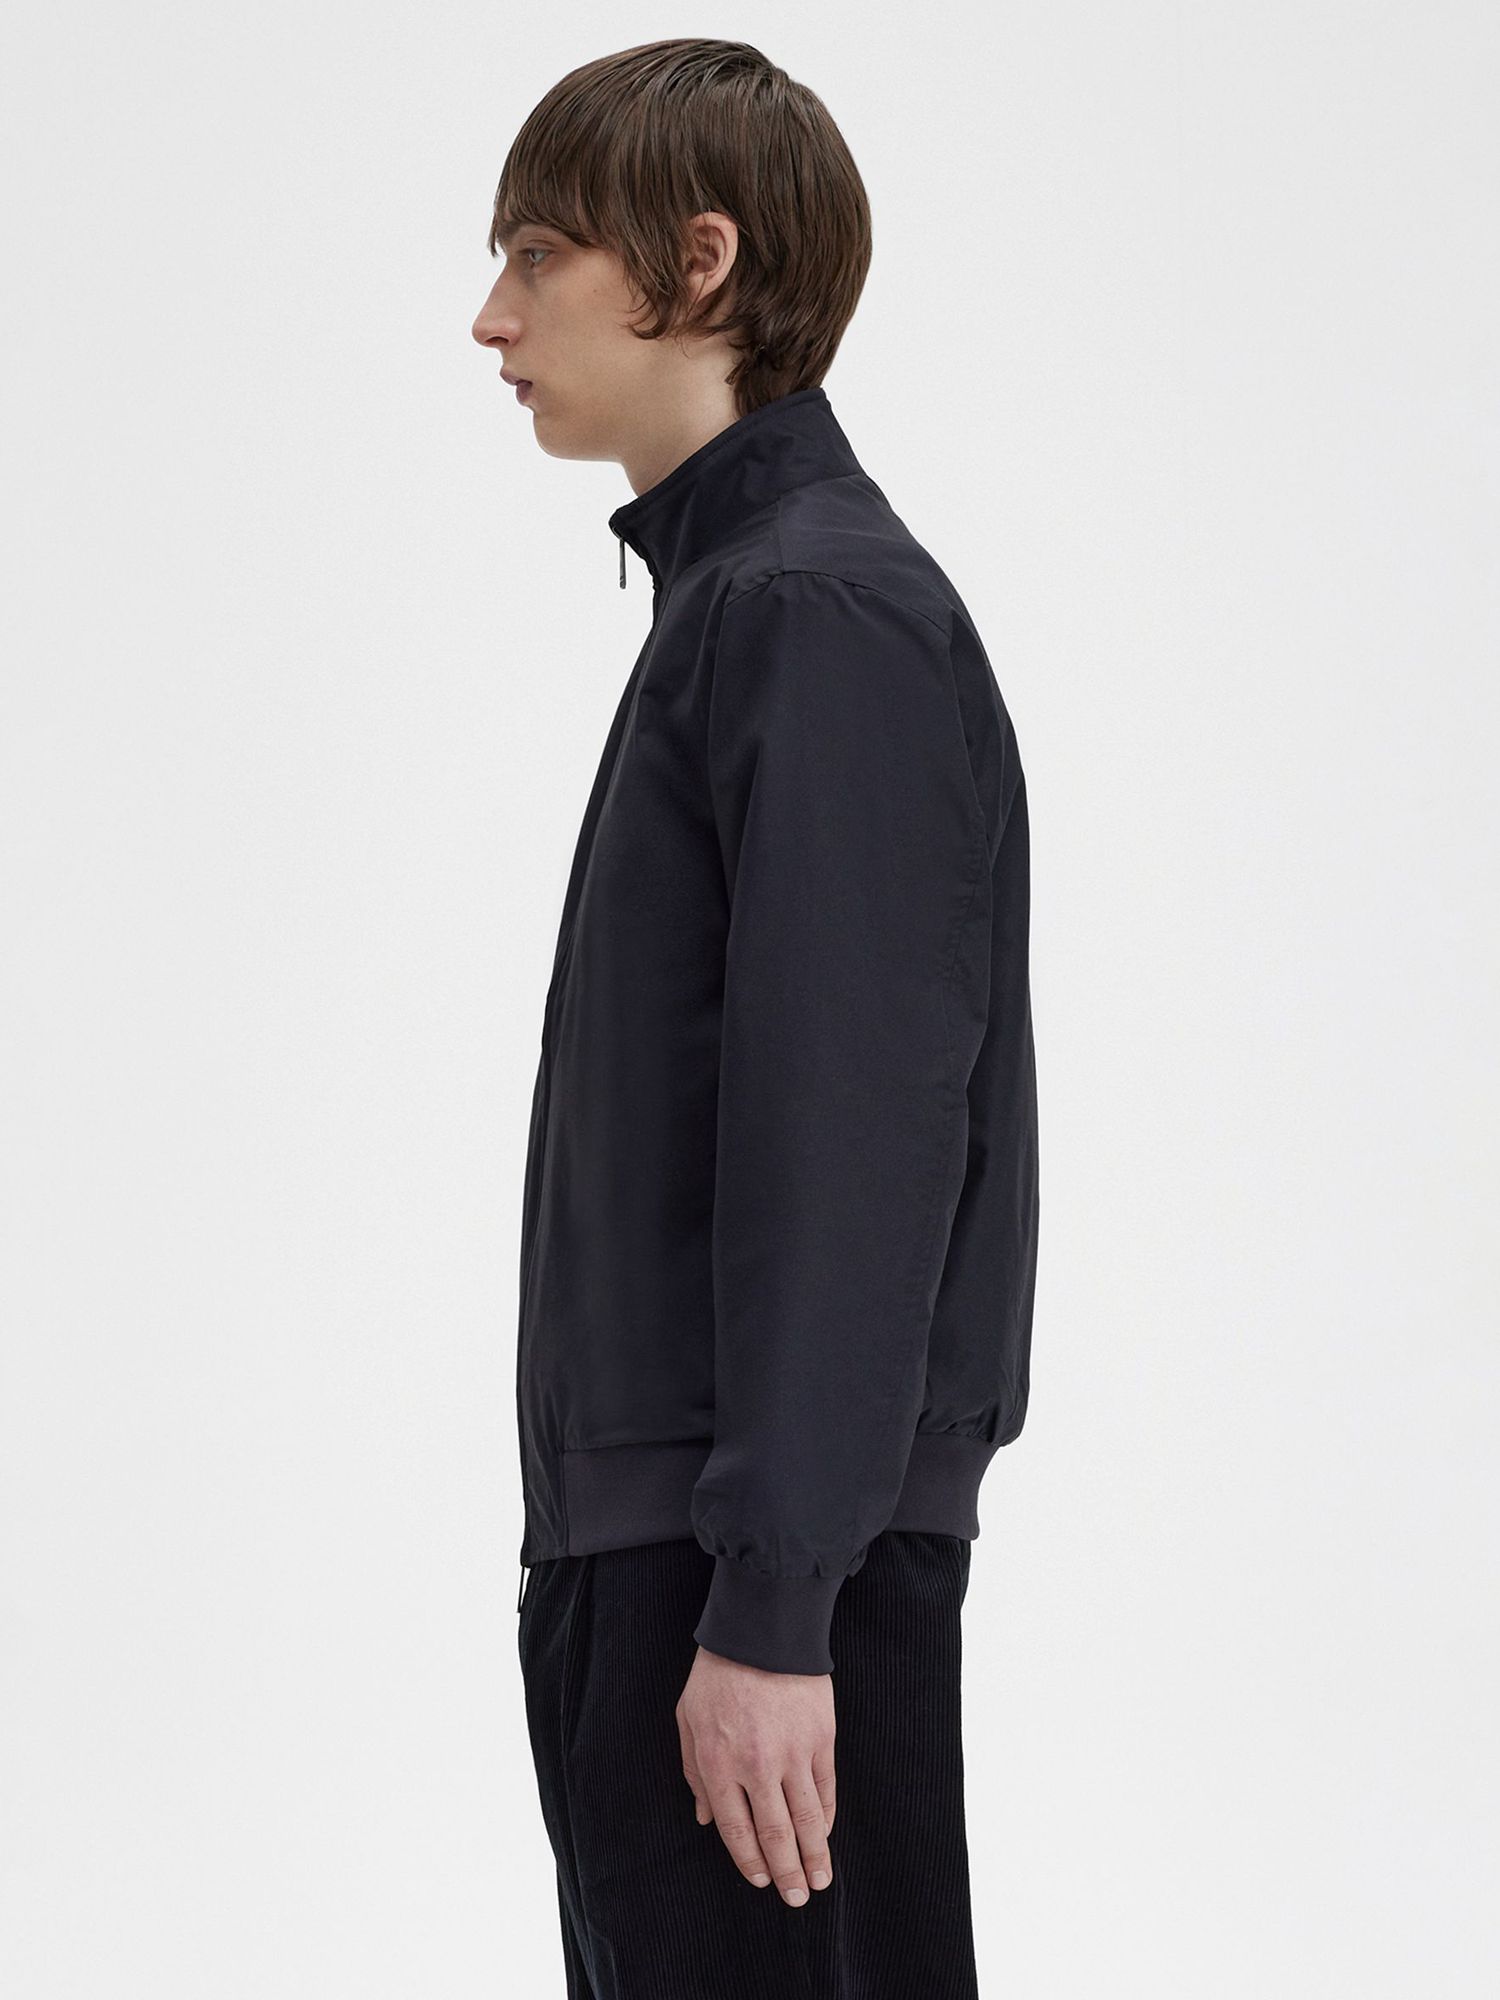 Fred Perry Brentham Jacket, Black, S